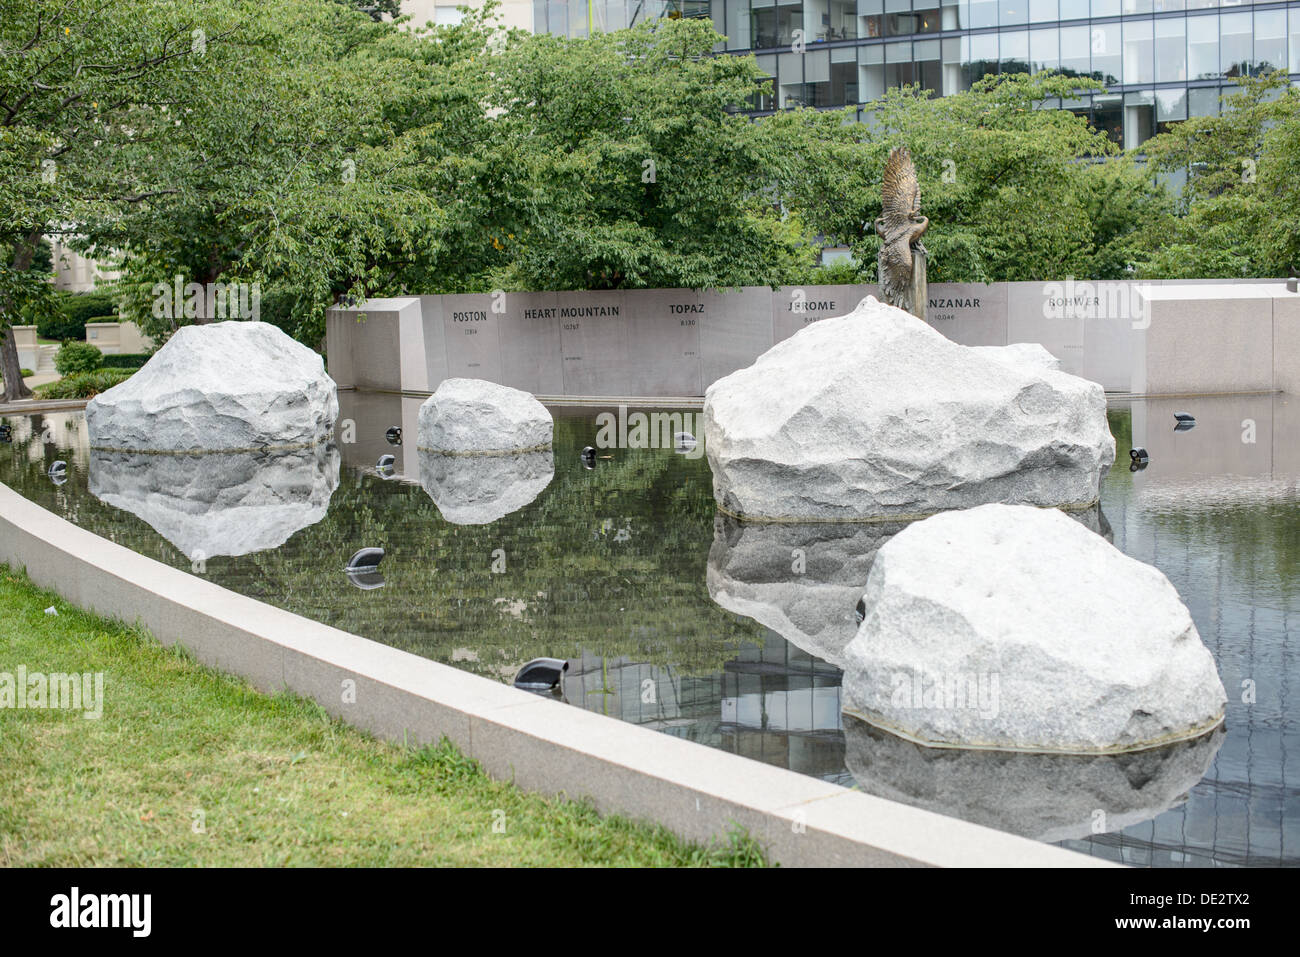 WASHINGTON DC, USA - A reflection pool with large rocks at the Memorial to Japanese-American Patriotism in World War II near the US Capitol in Washington DC. The memorial was designed by Davis Buckley and Nina Akamu and commemorates those held in Japanese American internment camps during World War II. Stock Photo